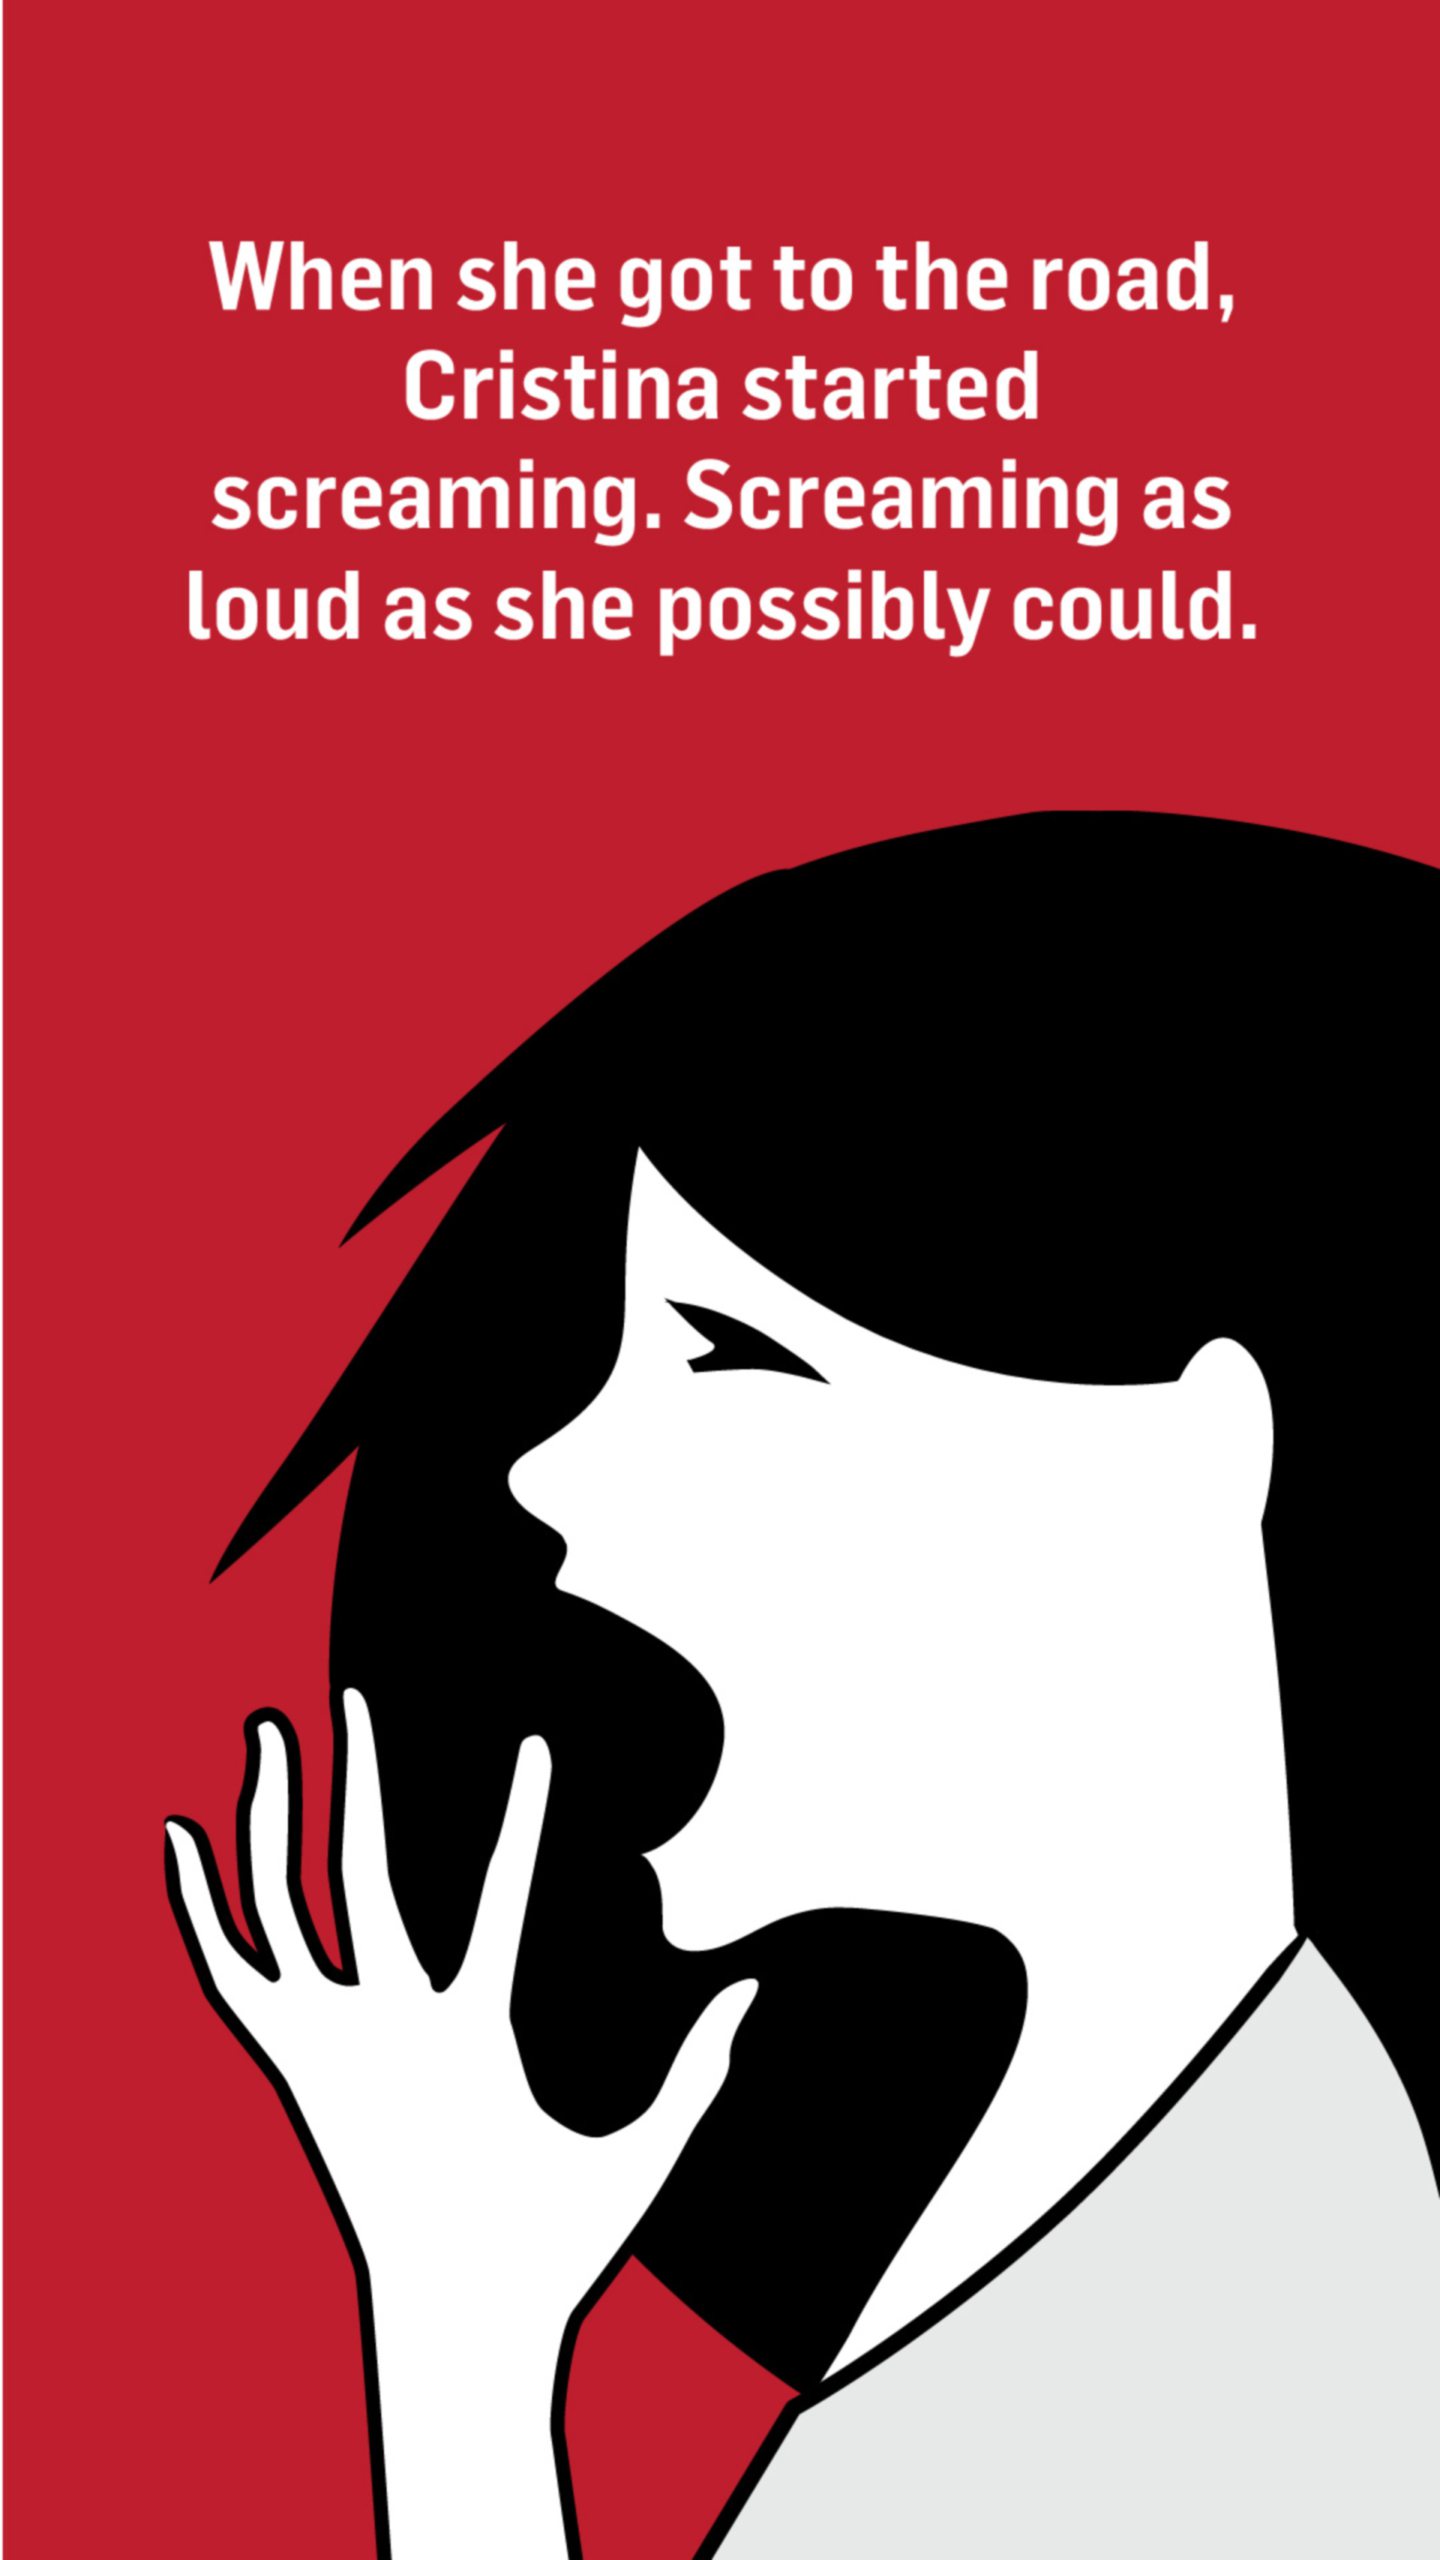 An illustration of a woman screaming. Words above the image read: When she got to the road, Cristina started screaming. Screaming as loud as she possibly could.